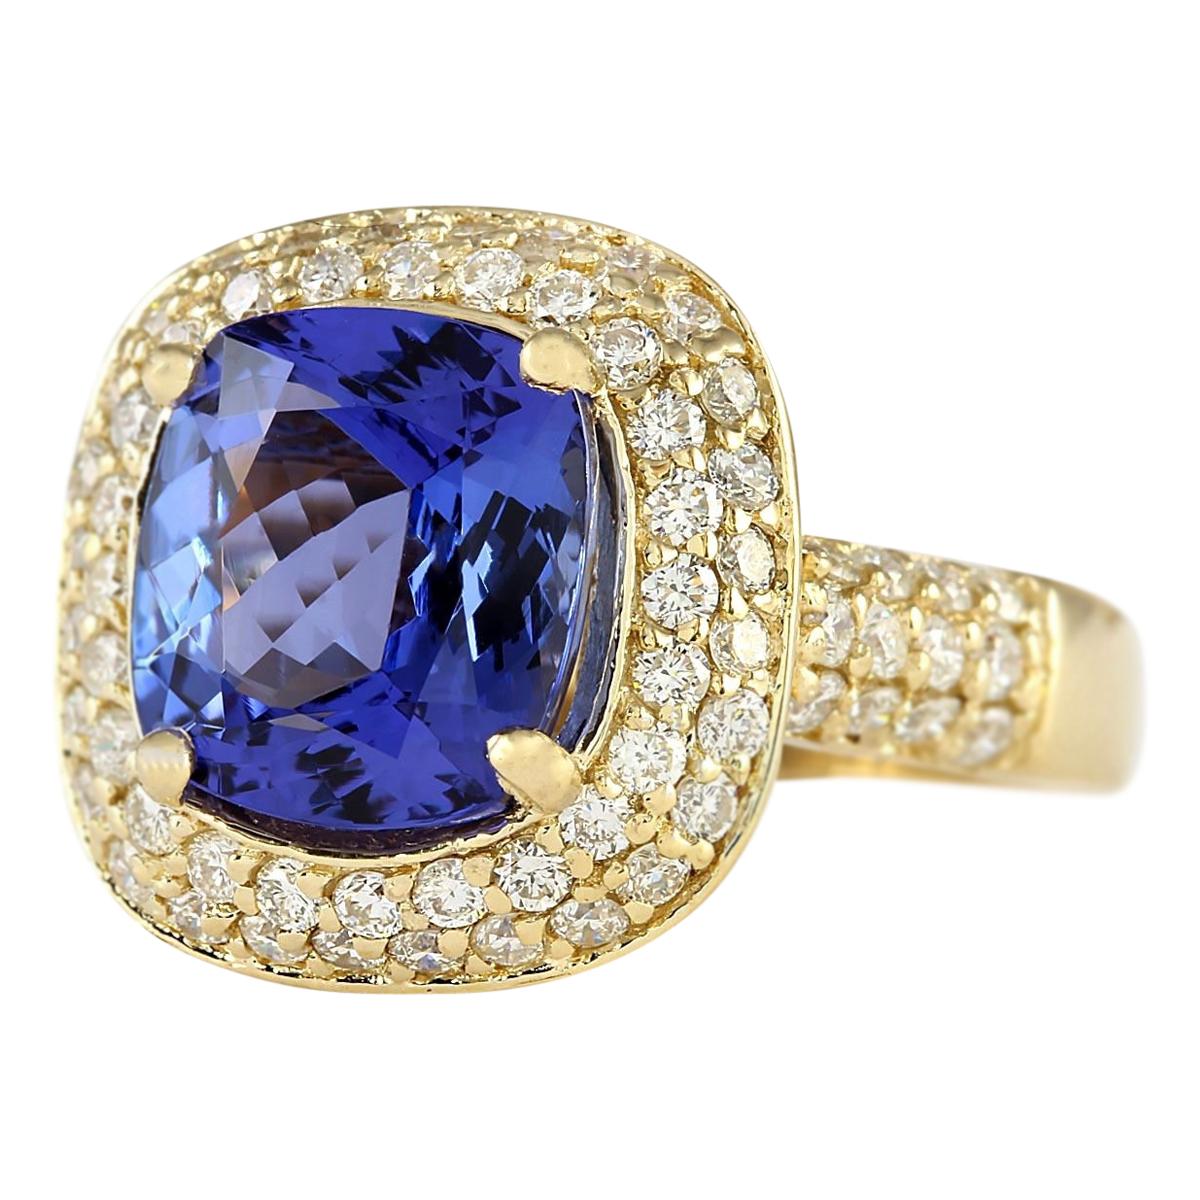 5.27 Carat Natural Tanzanite 14 Karat Yellow Gold Diamond Ring
Stamped: 14K Yellow Gold
Total Ring Weight: 5.2 Grams
Total Natural Tanzanite Weight is 4.22 Carat (Measures: 9.50x9.50 mm)
Color: Blue
Total Natural Diamond Weight is 1.05 Carat
Color: